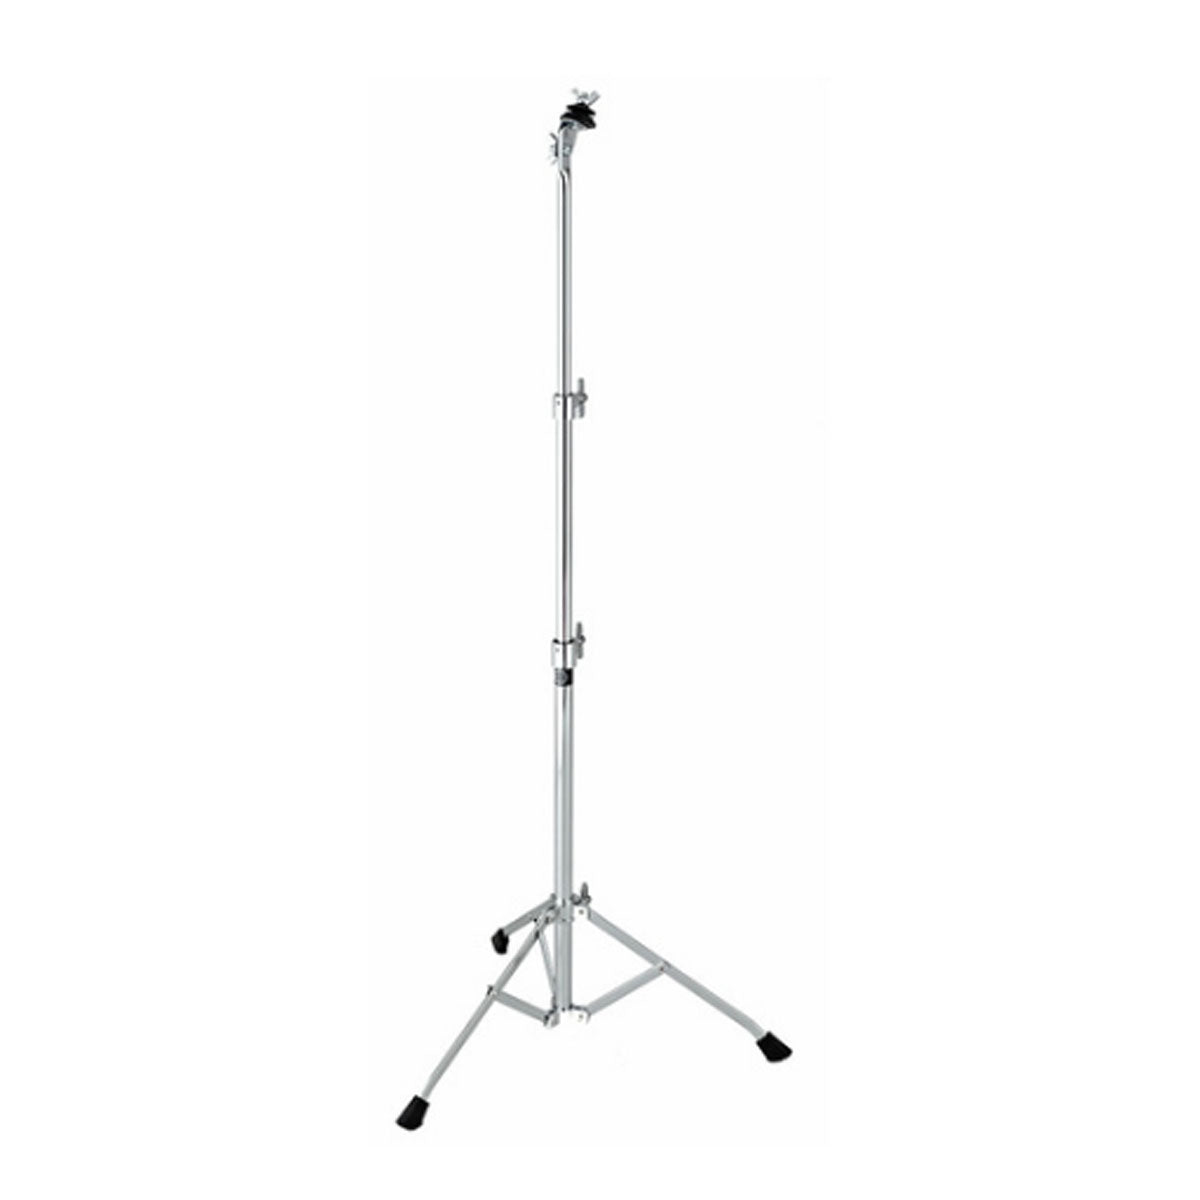 Dixon 9260 Series Straight Cymbal Stand Light-Weight Single Braced - PSY9260